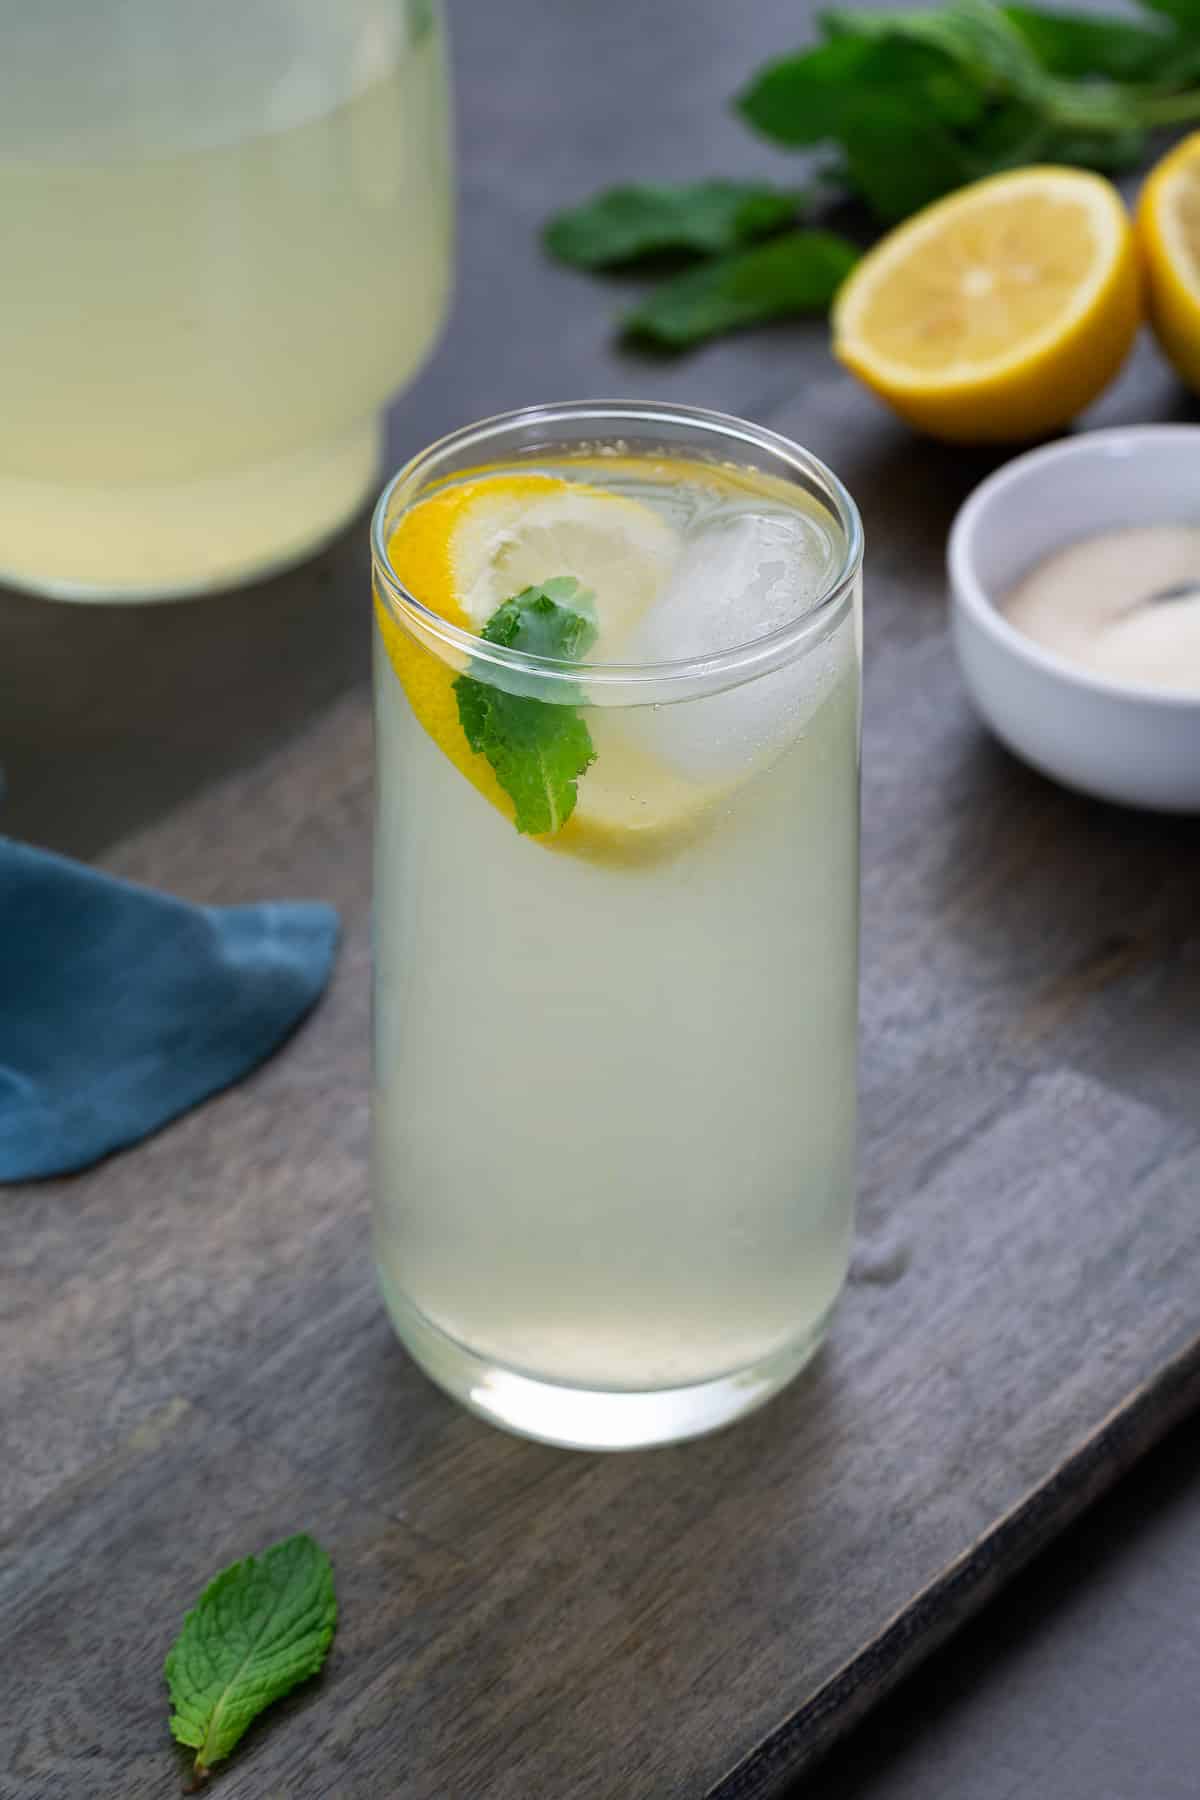 Fresh Lemon Juice in a glass placed on a grey table with sugar and cut lemon alongside